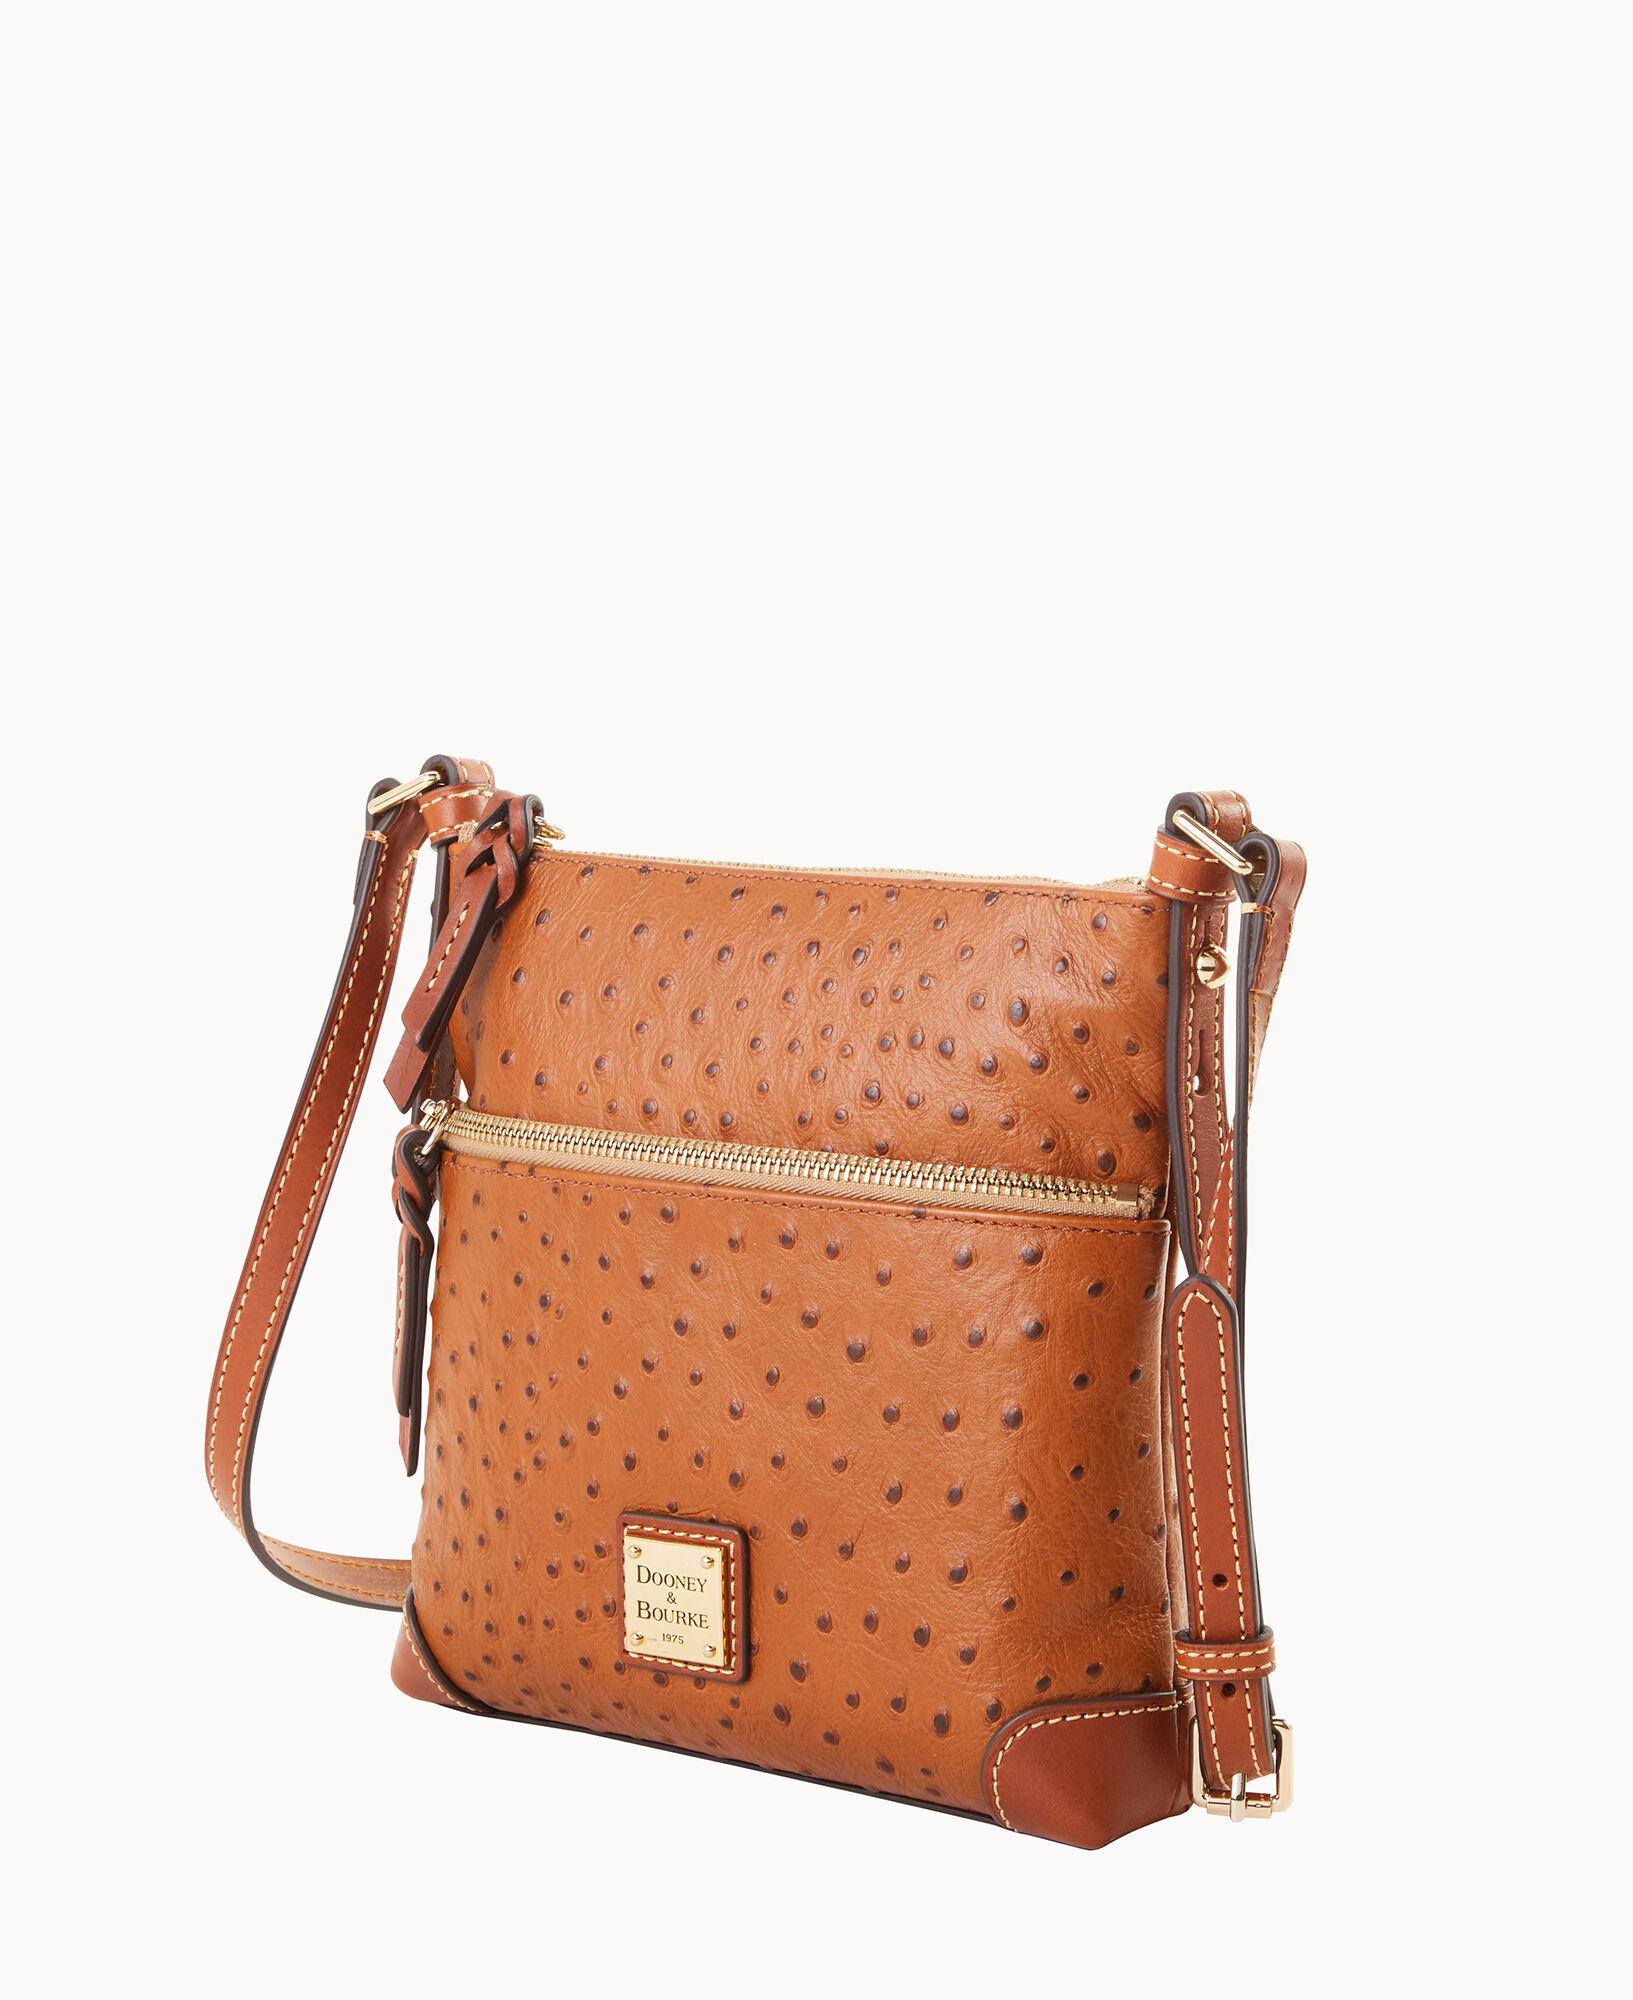 Dooney Bourke Ostrich Collection Leather Tote Bag